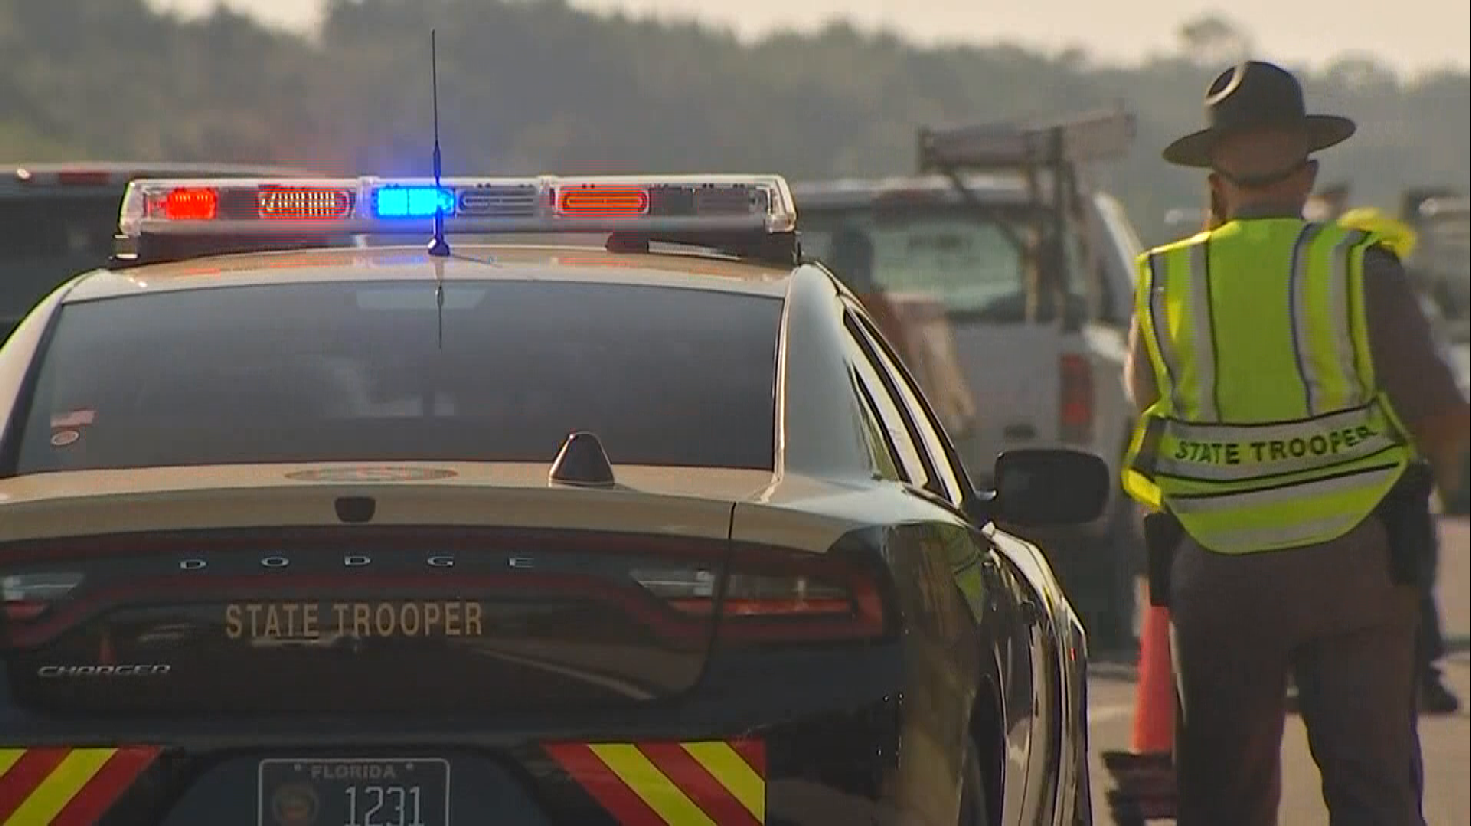 Starting Monday, law enforcement agencies are teaming up to target speeding drivers in Southwest Florida with Operation Southern Slow Down.